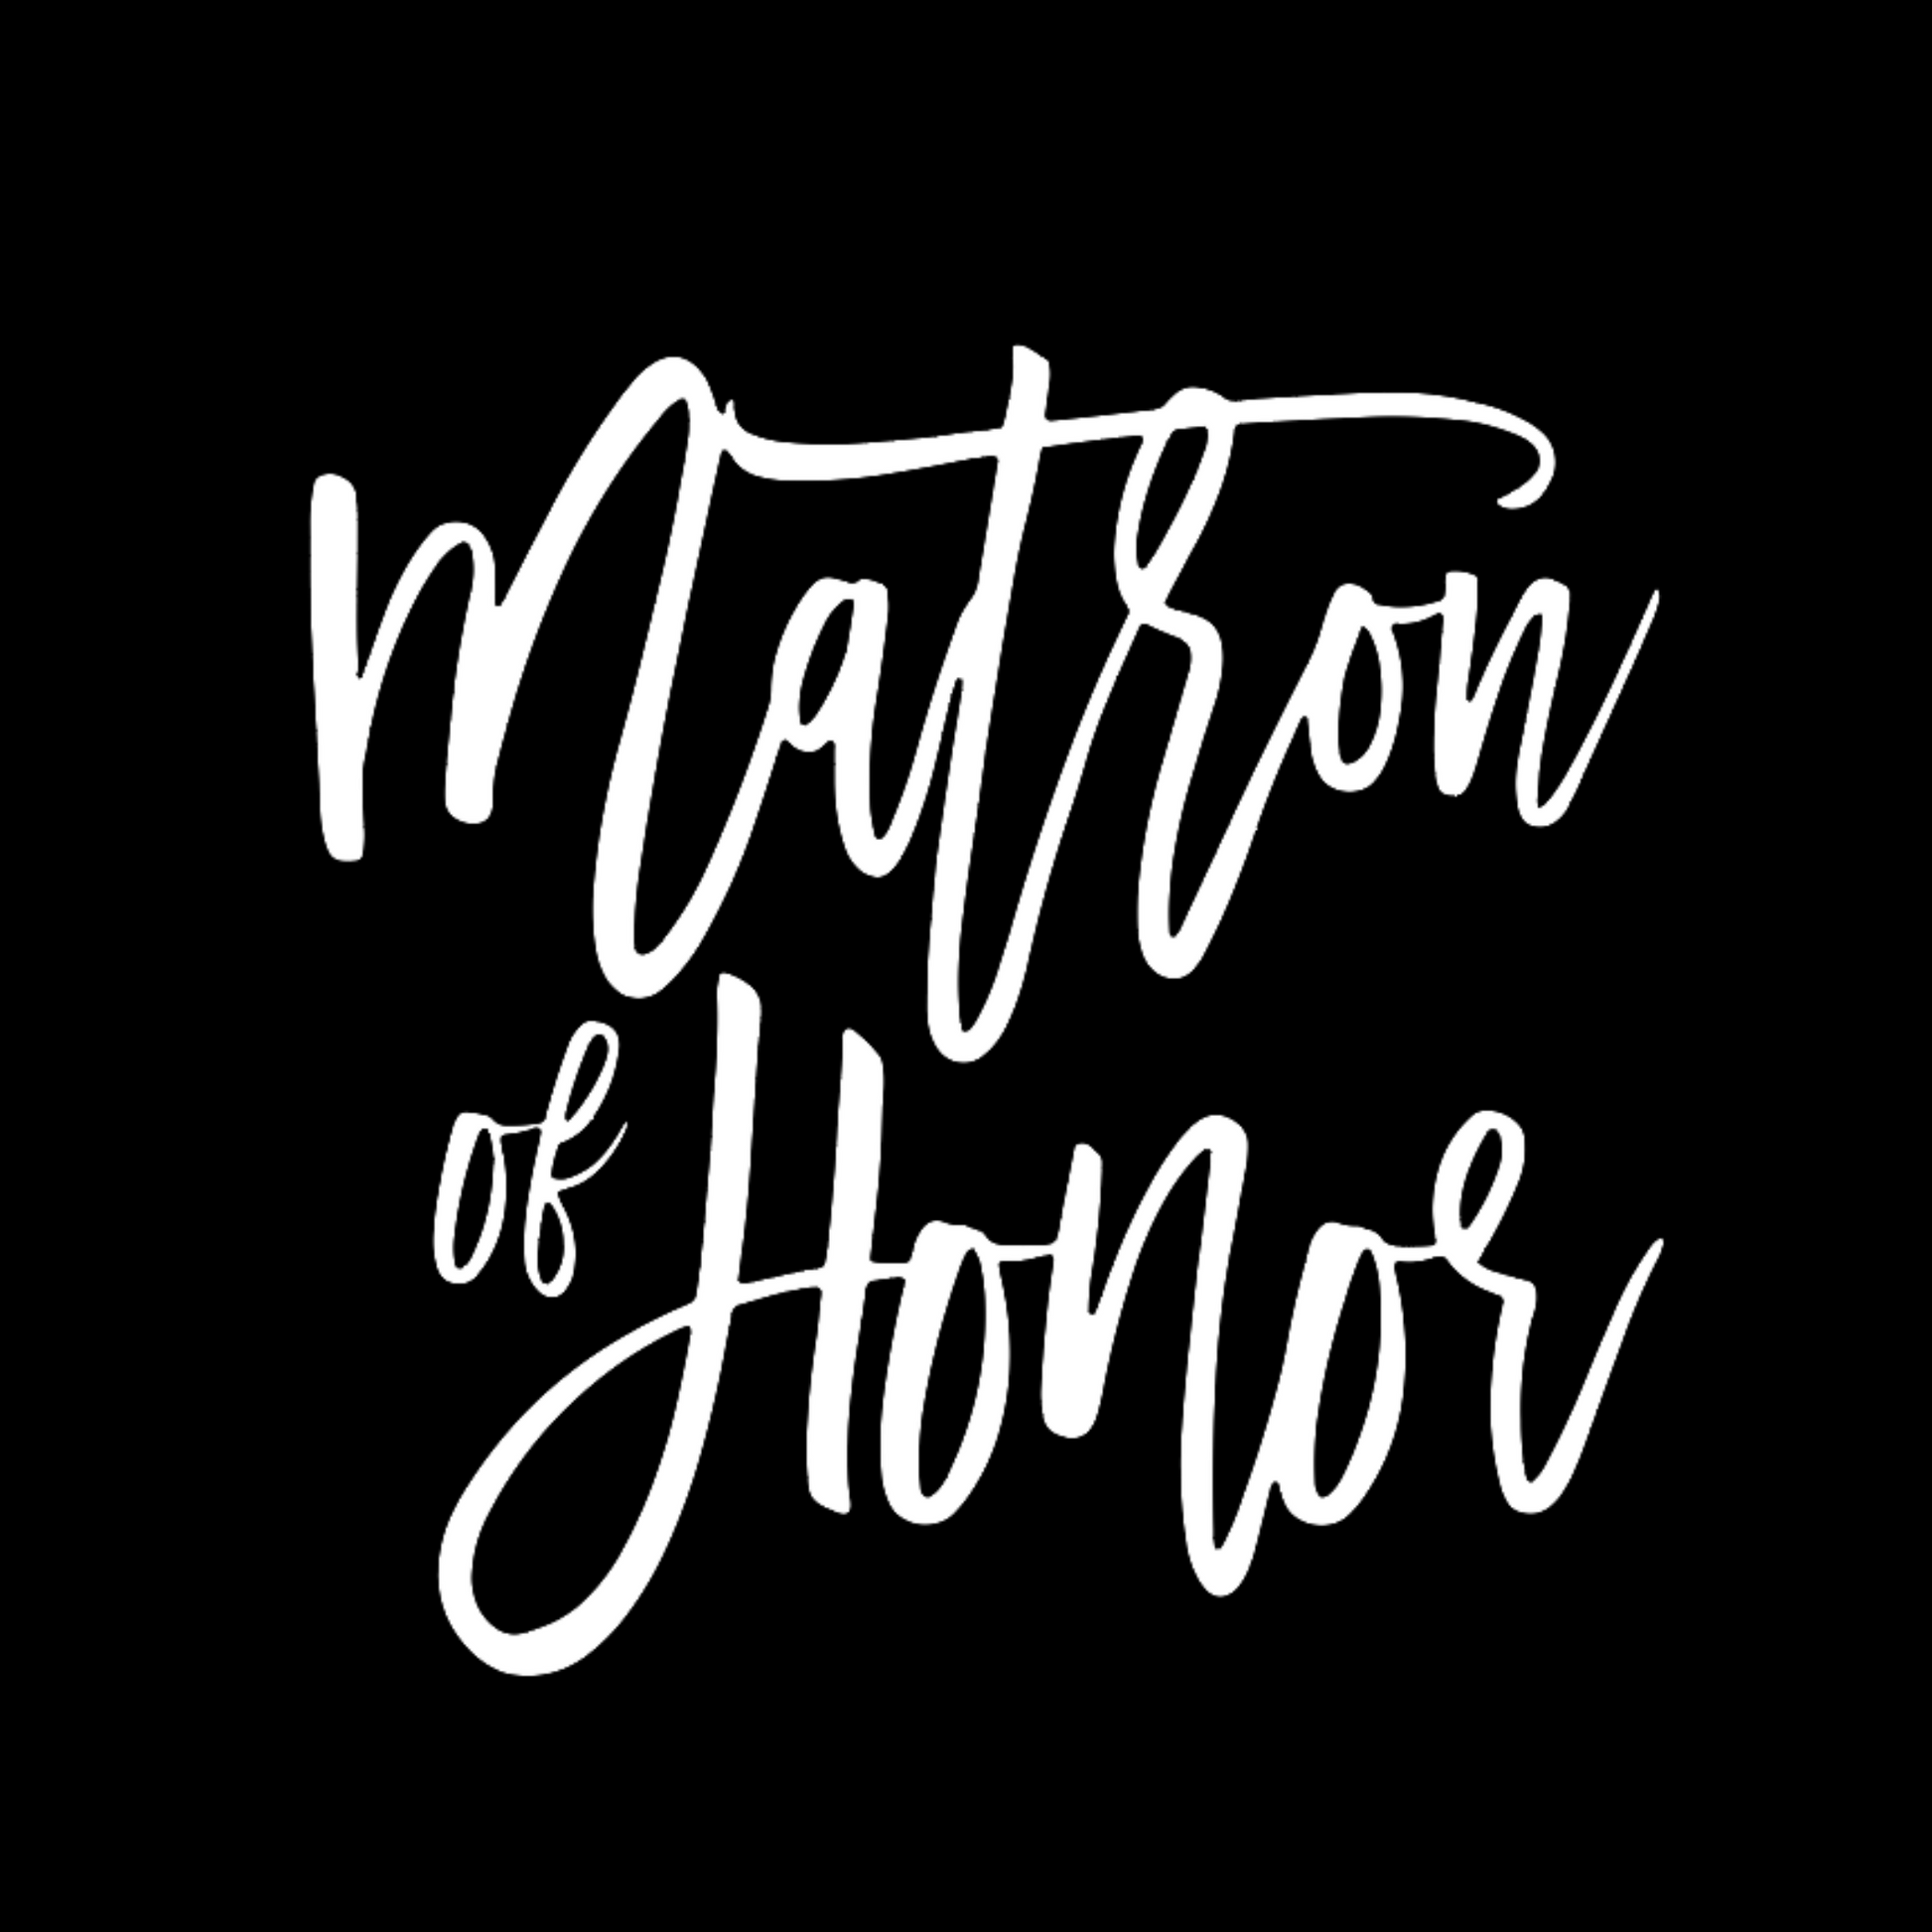 Matron of Honor T-Shirt in black with white script font writing on the front. This is an image of the design in white on black background.